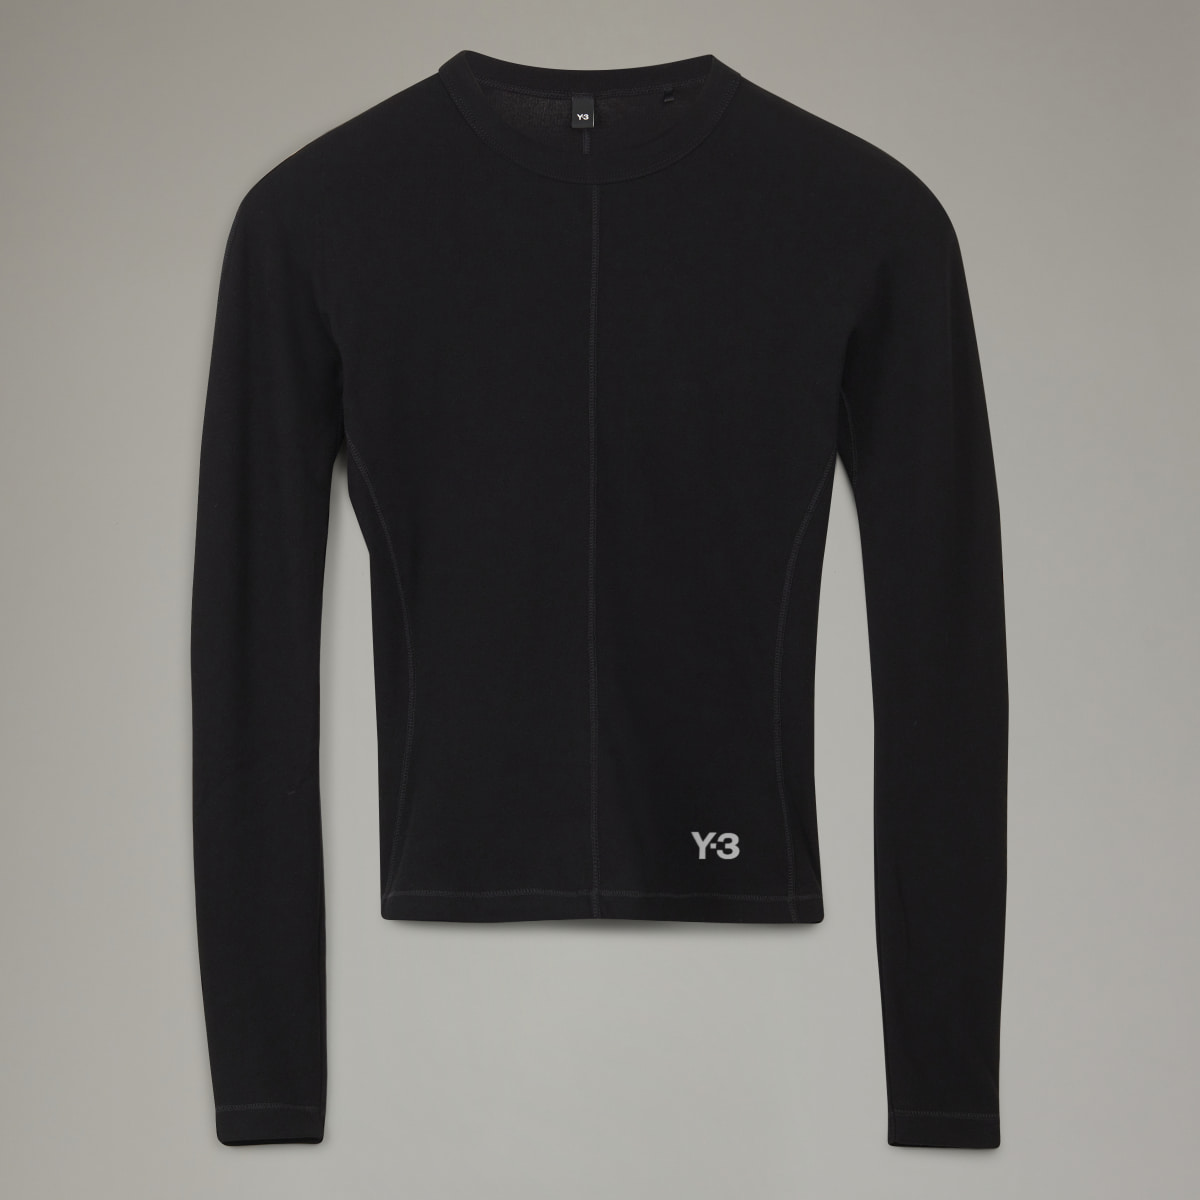 Adidas Y-3 Fitted Long Sleeve Tee. 5